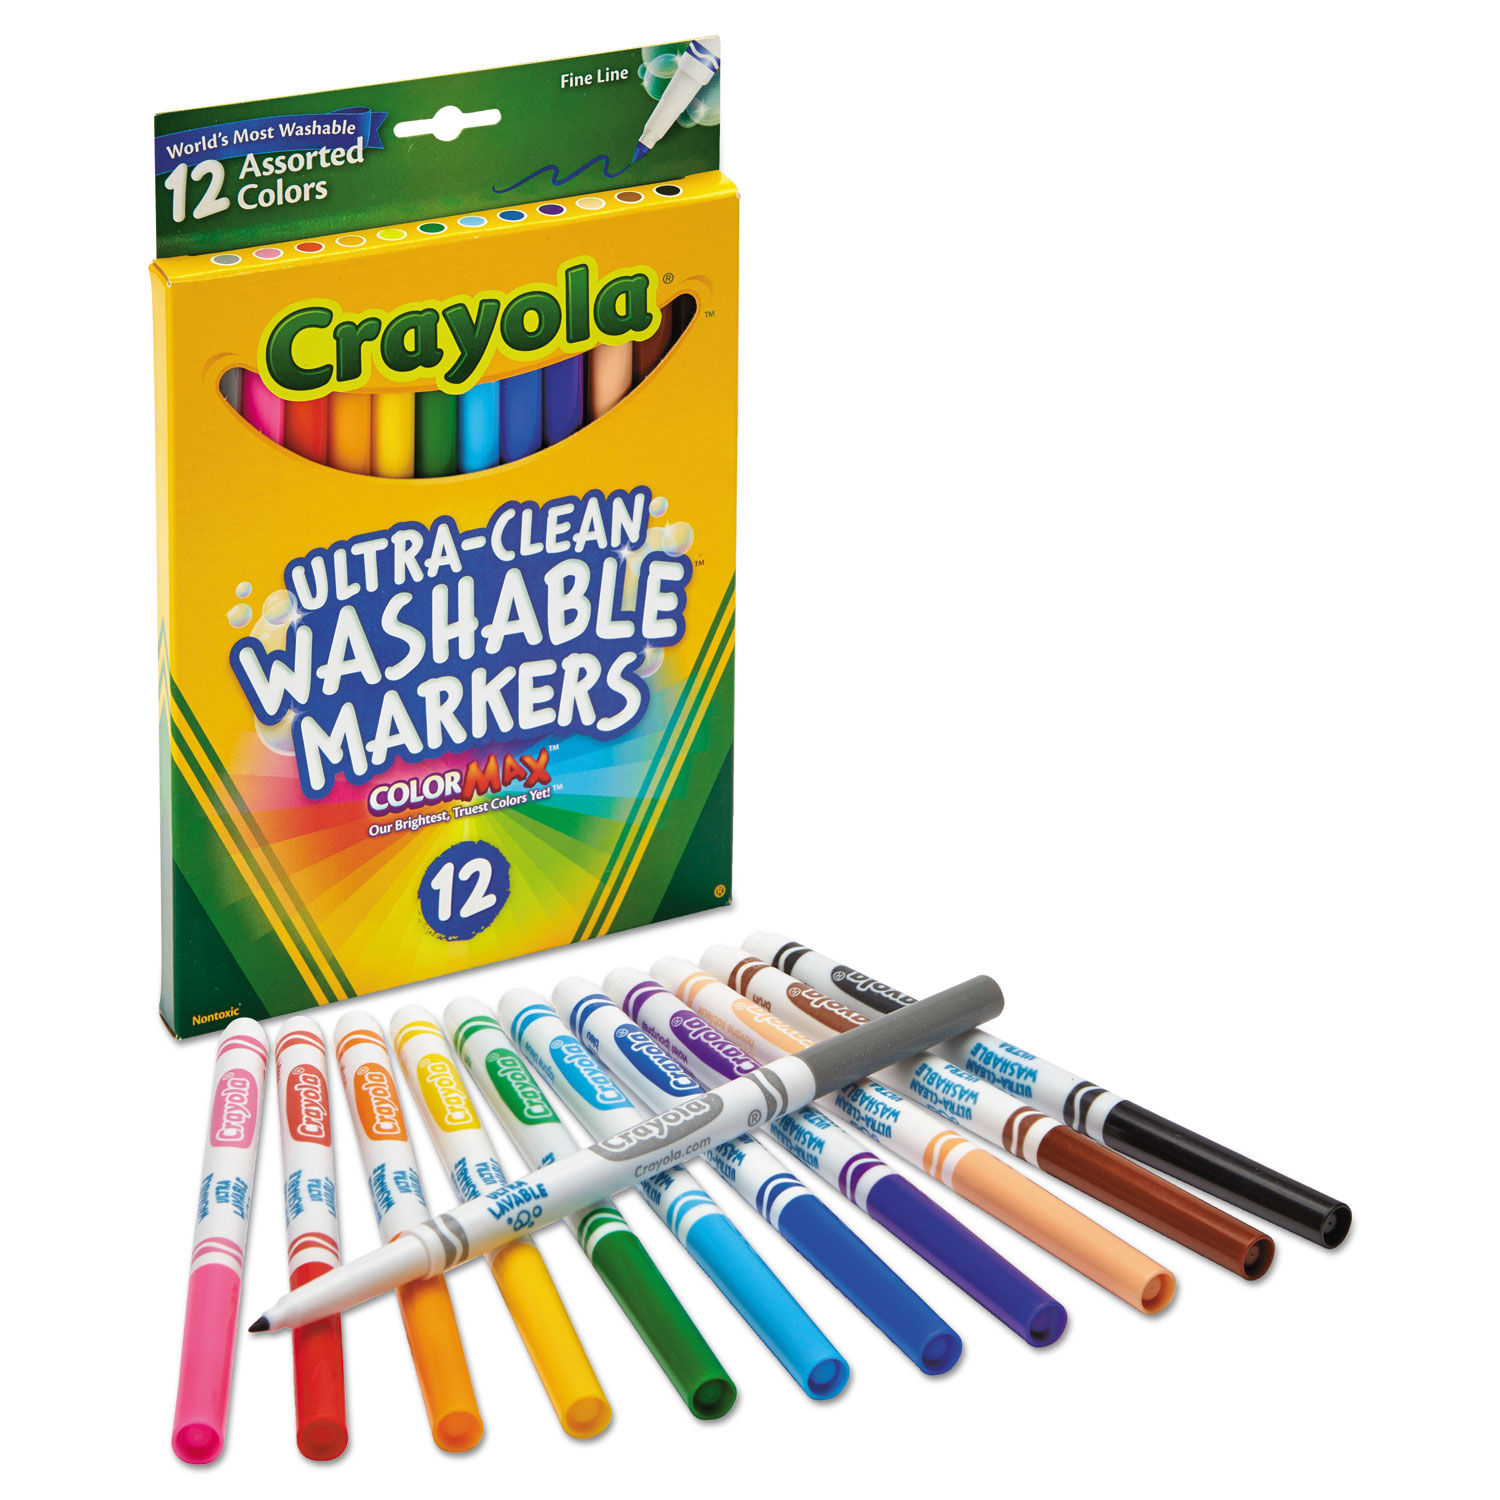 Ultra-Clean Washable Markers, Fine Line, 8 count, Crayola.com